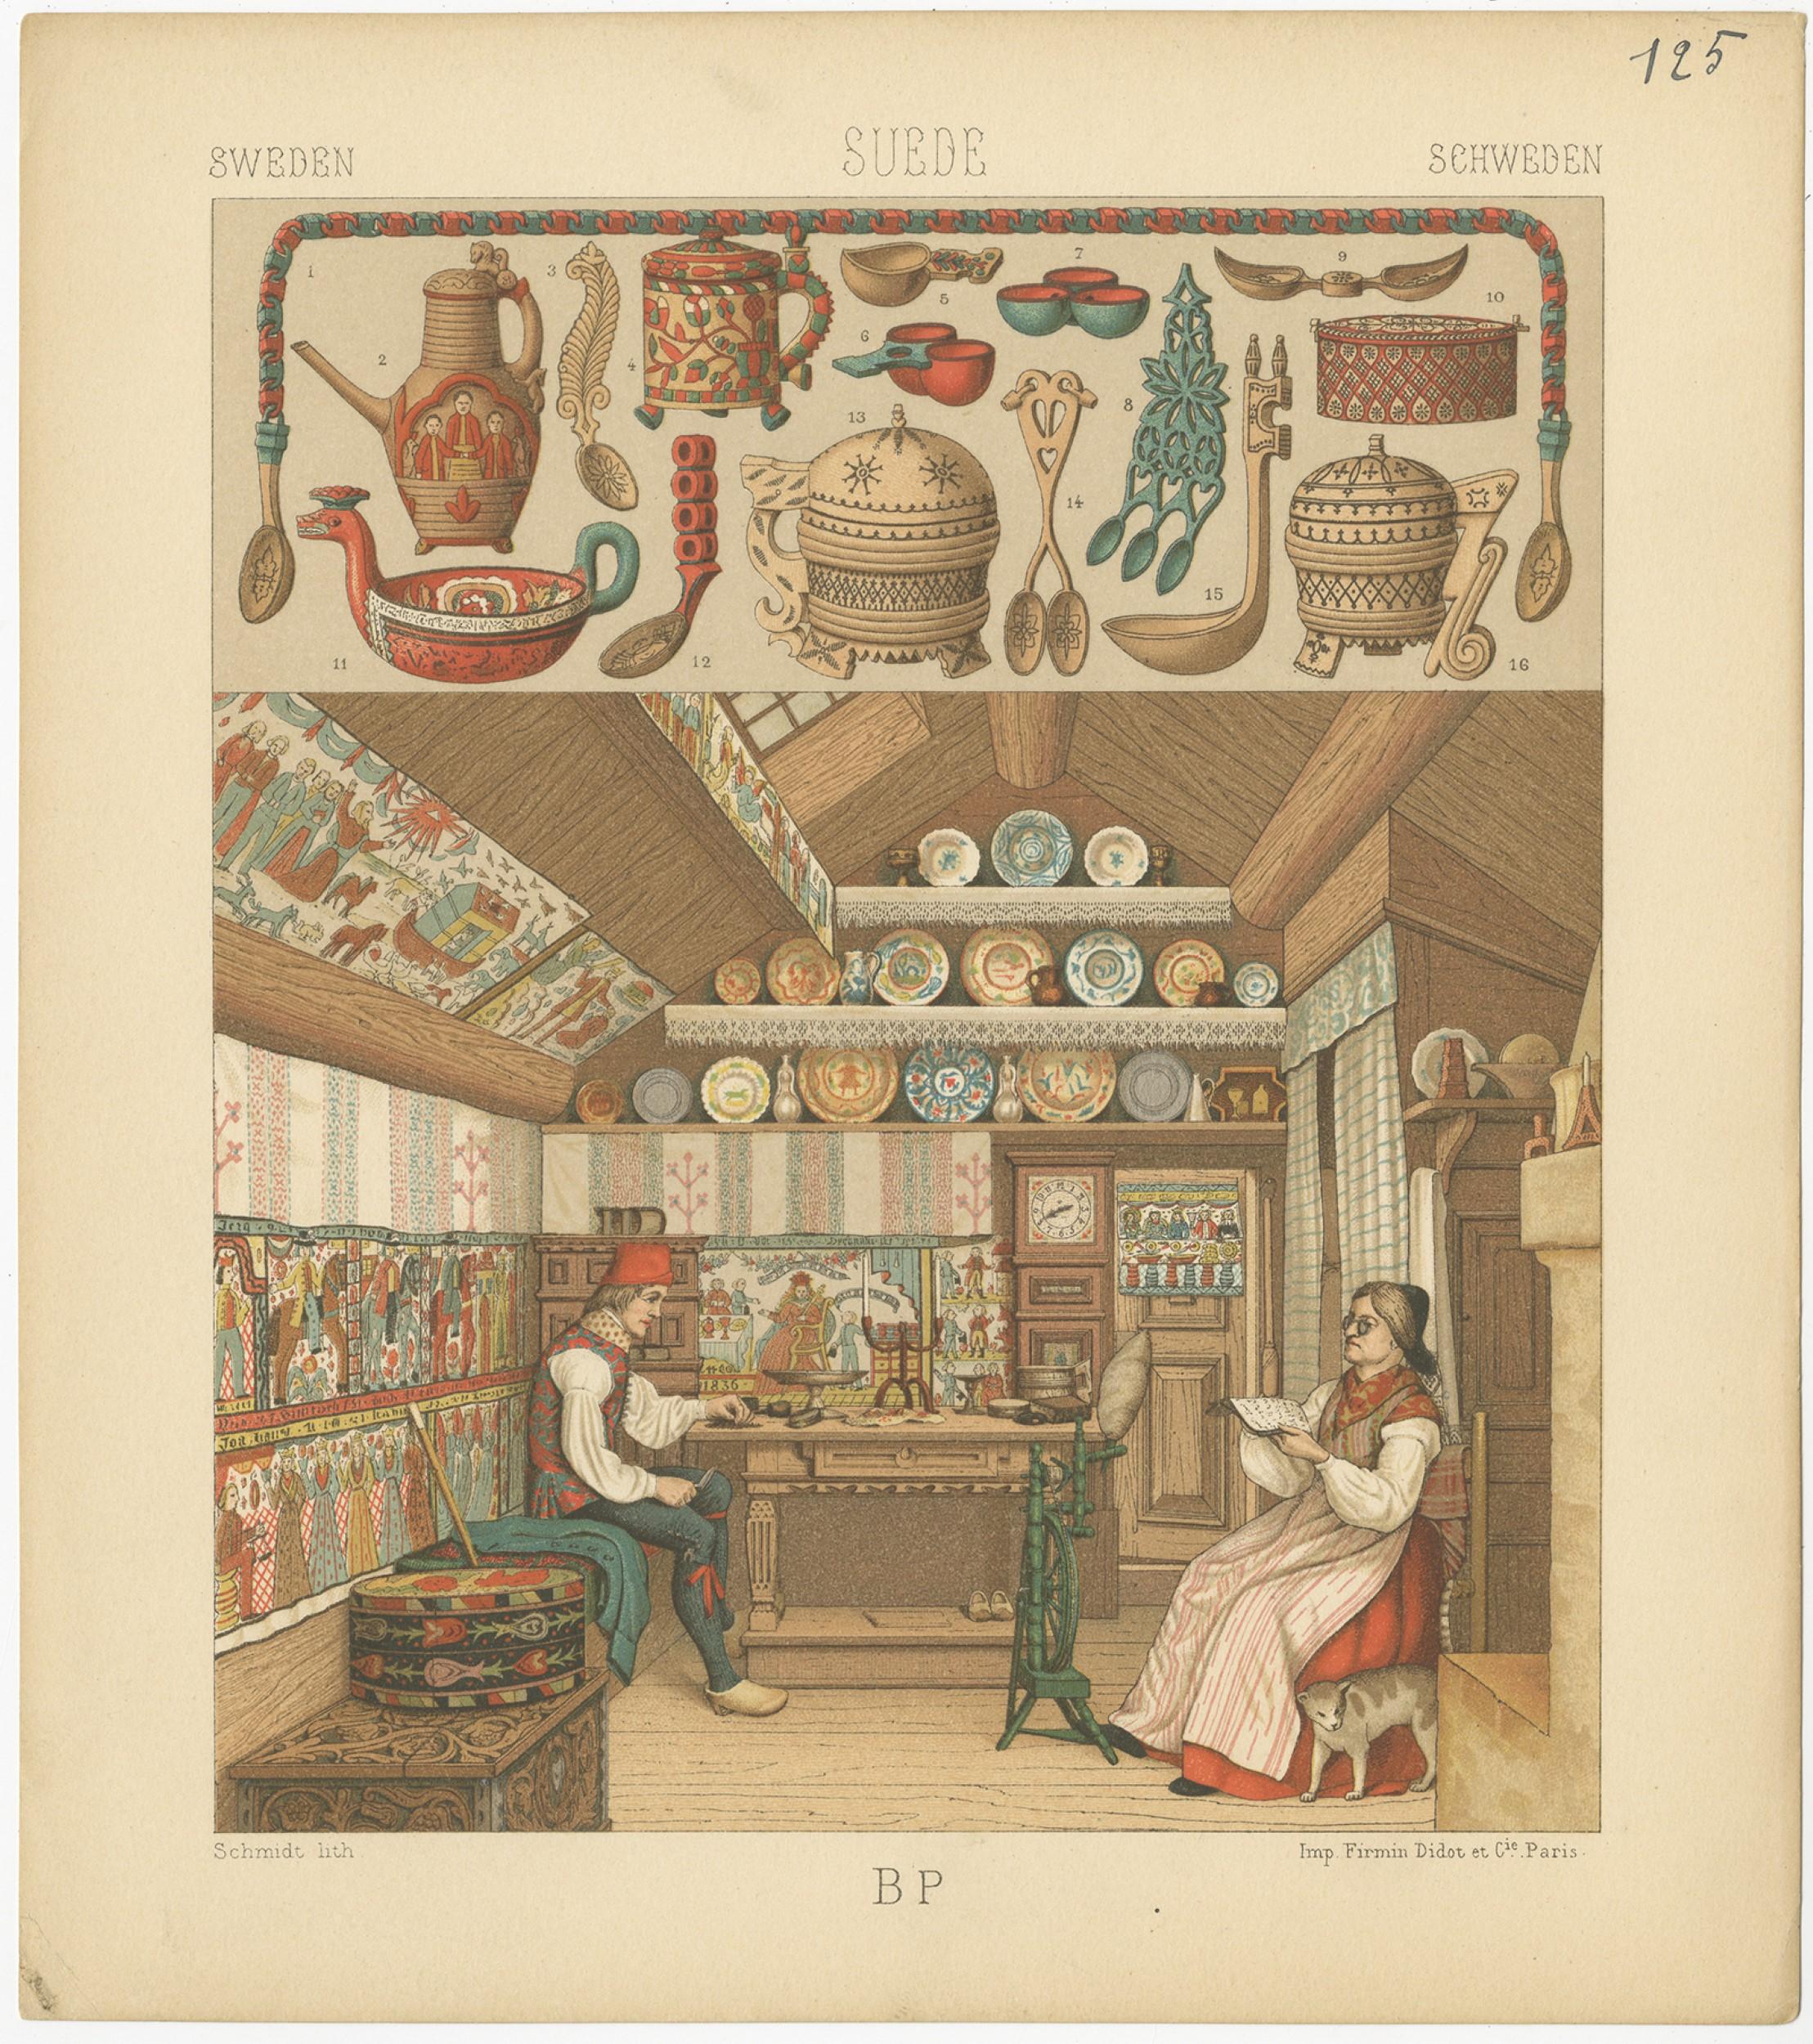 Antique print titled 'Sweden - Suede - Schweden'. Chromolithograph of Swedish interior. This print originates from 'Le Costume Historique' by M.A. Racinet. Published, circa 1880.